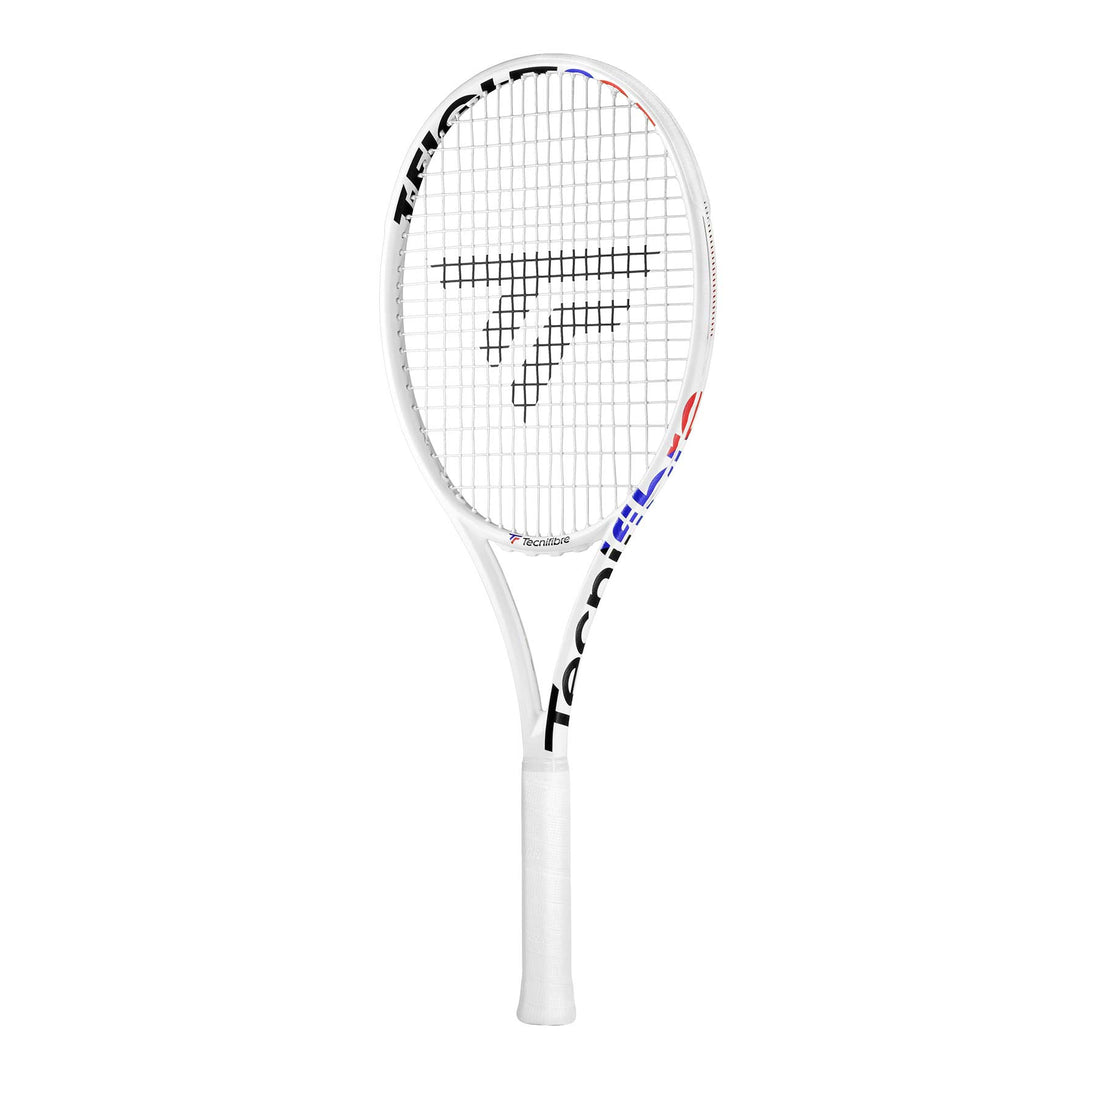 Tecnifibre T-Fight ISO 300 featuring its classy White/Royal/Red colors